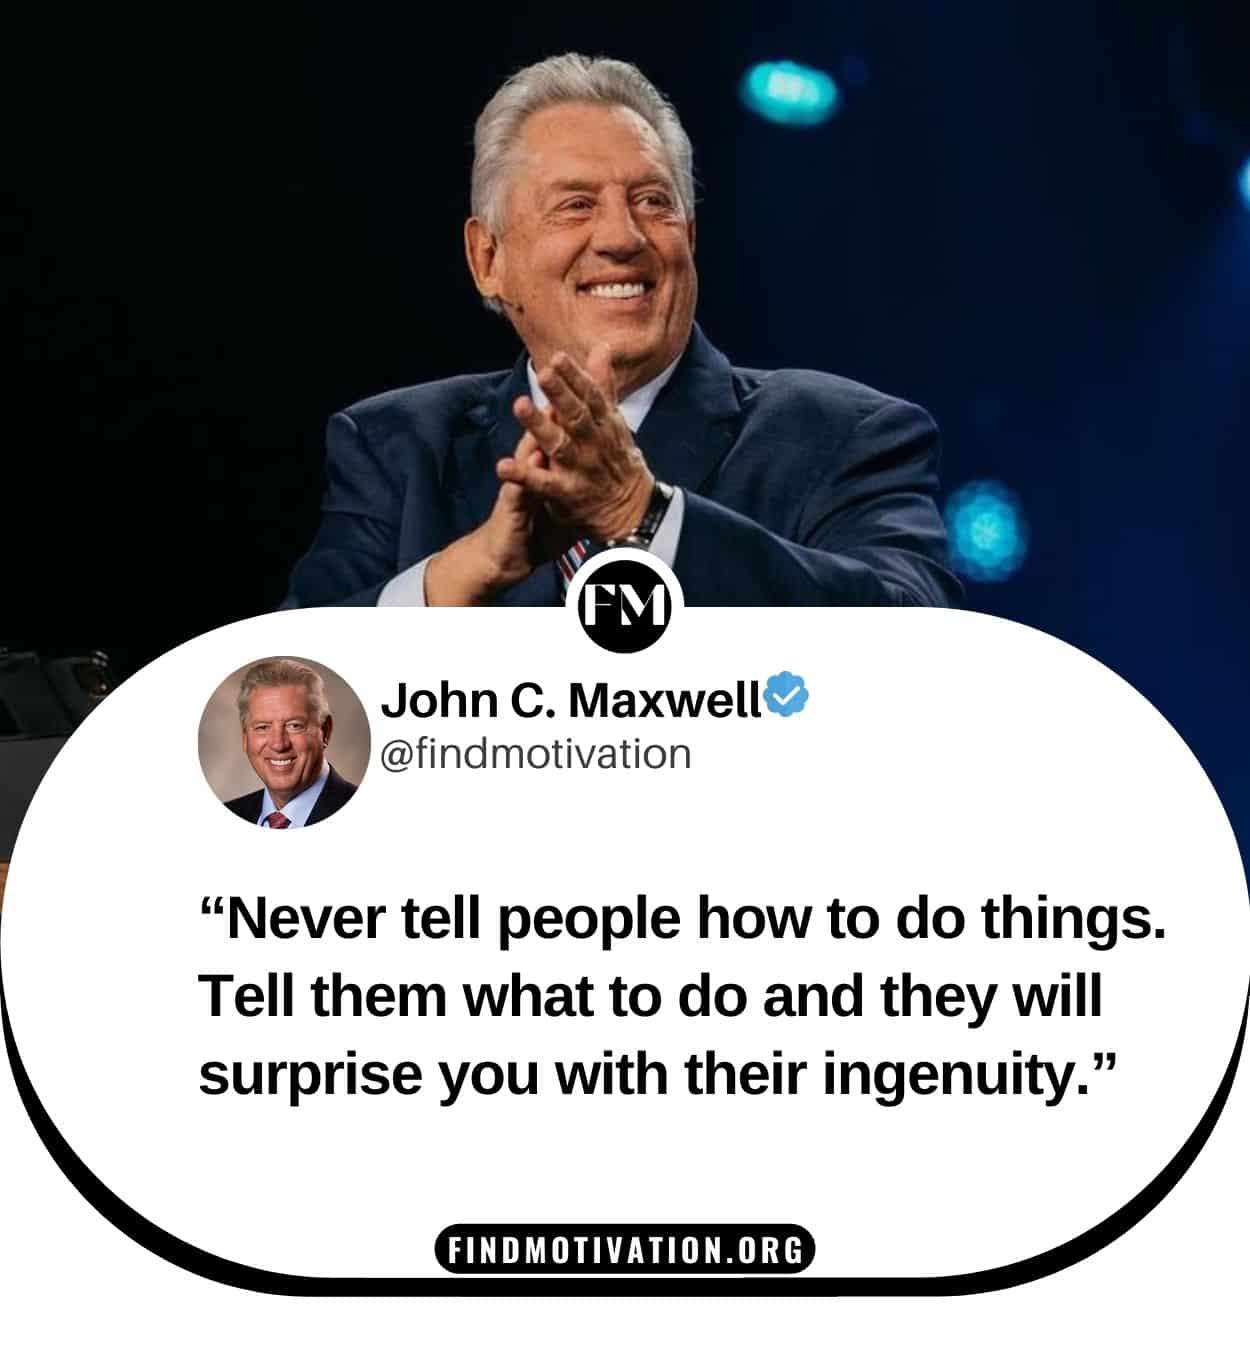 John C Maxwell Leadership Quotes to develop your leadership skills to become a successful leader